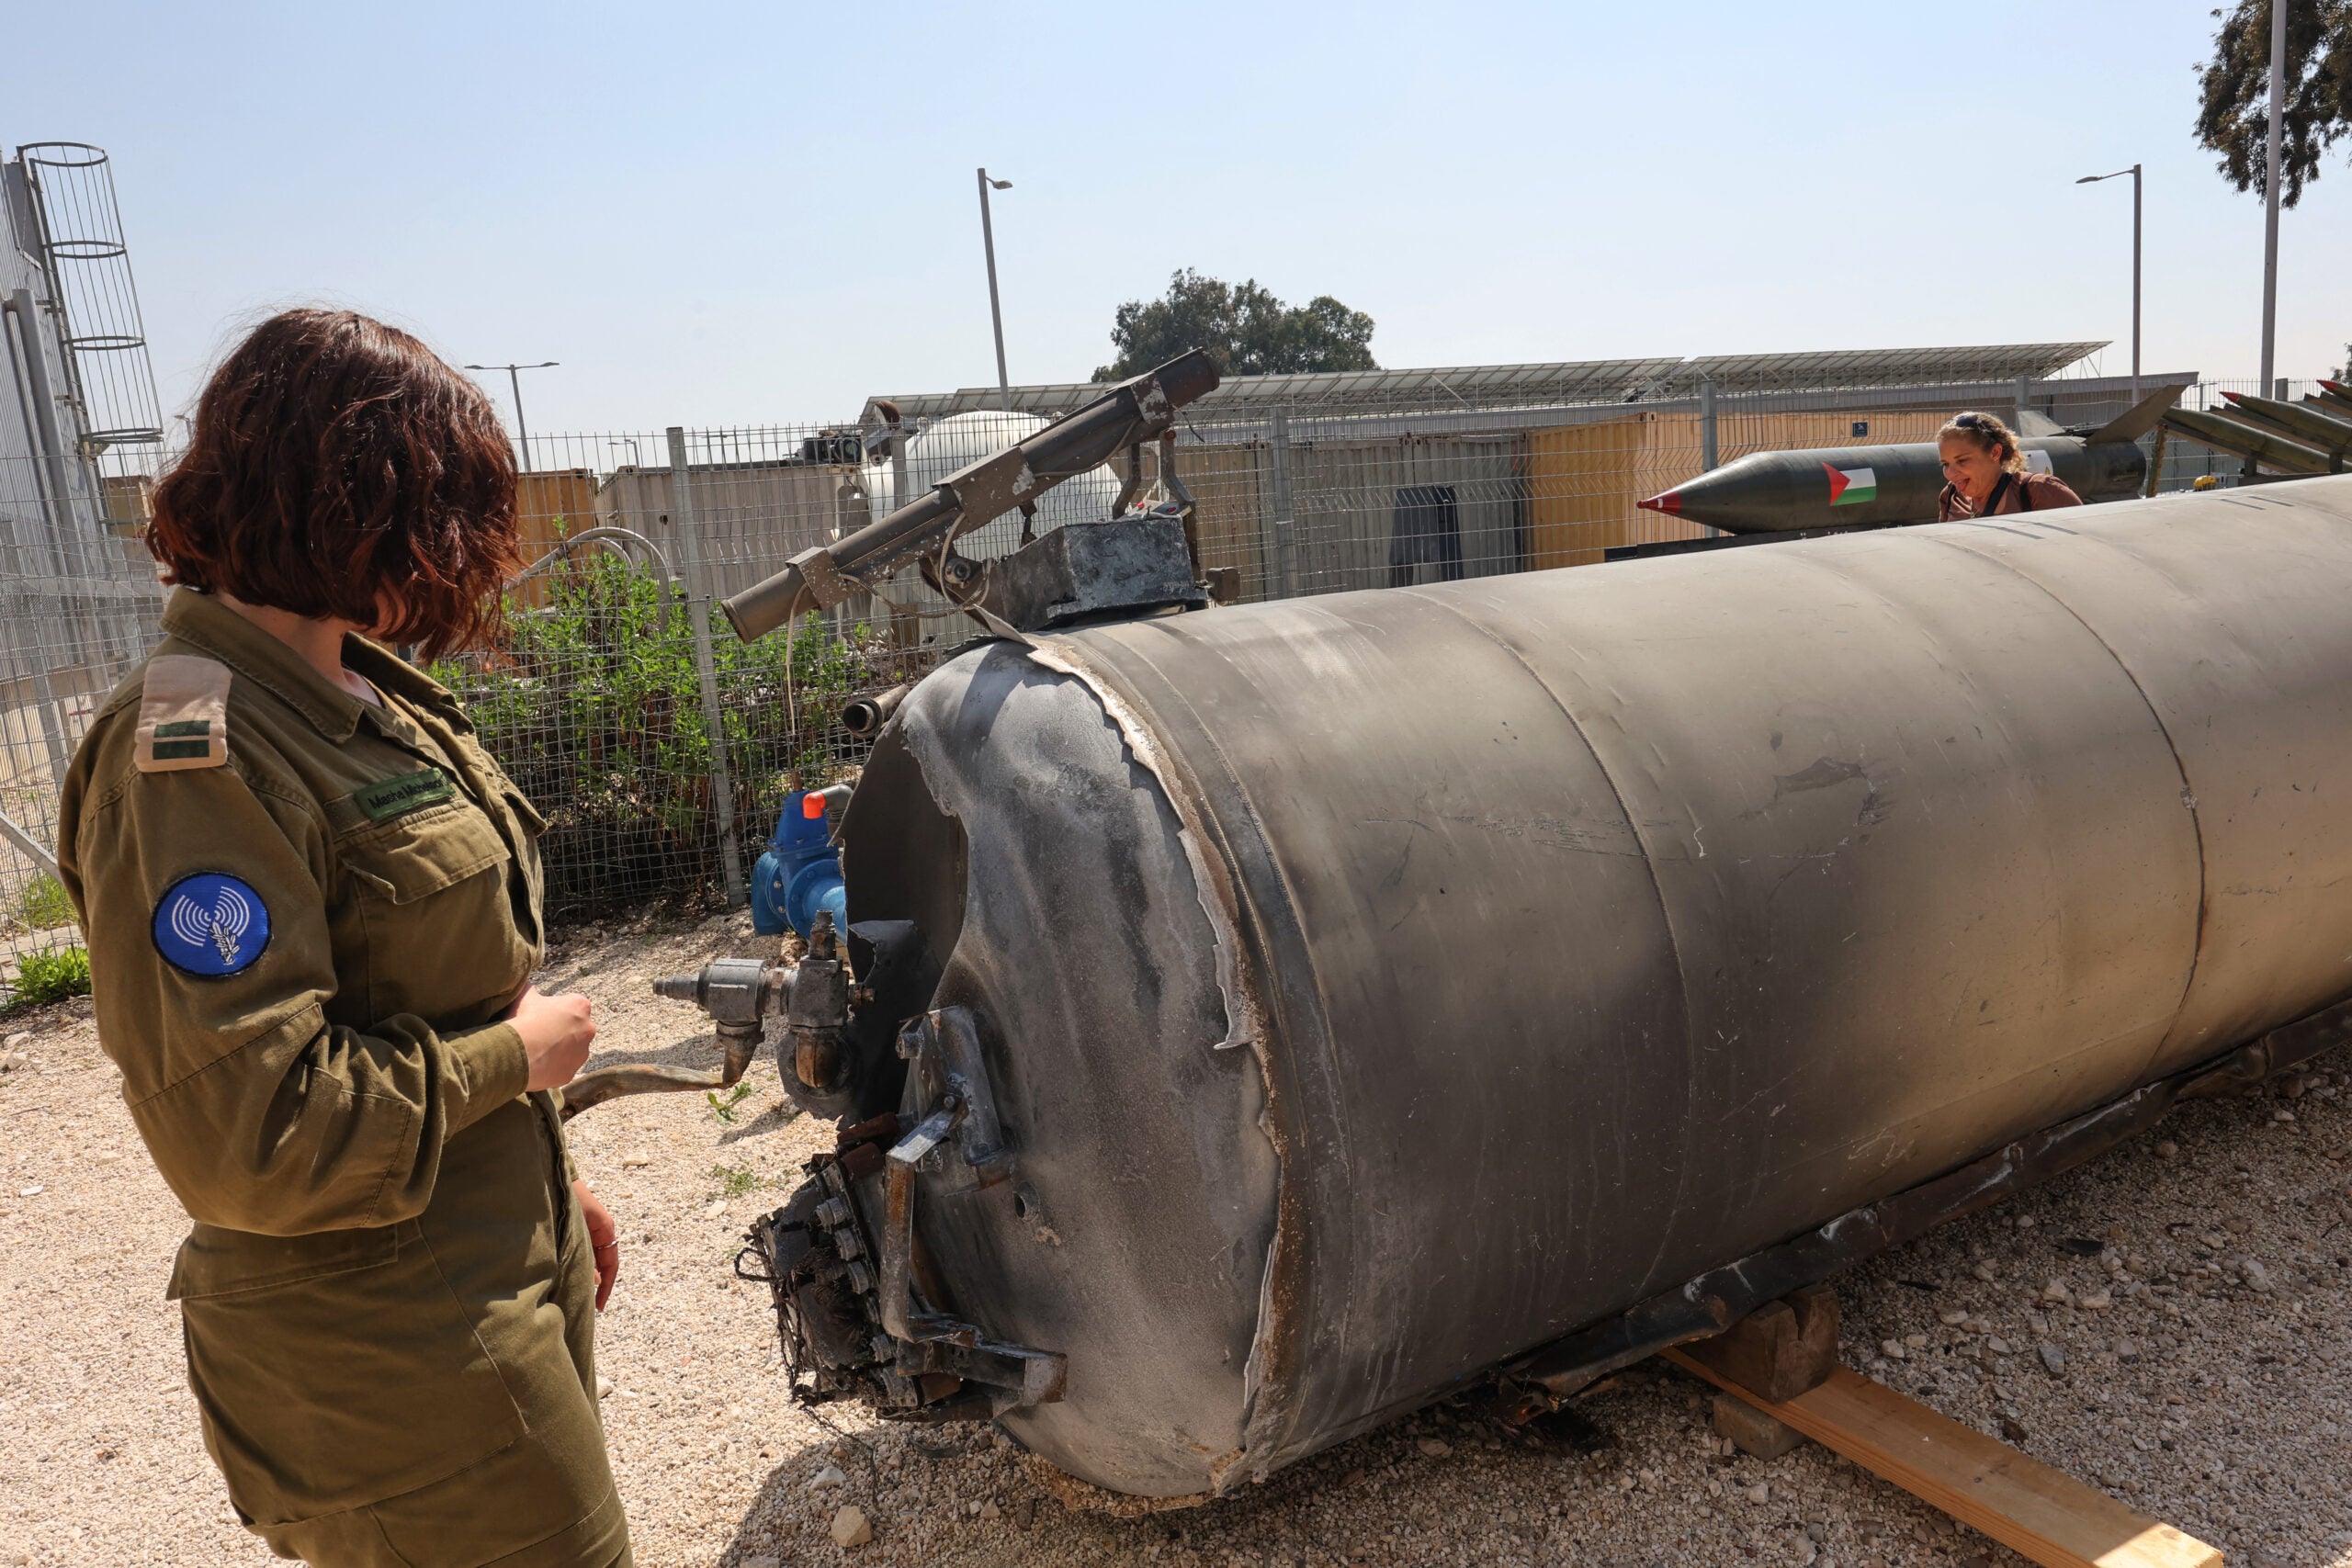 A member of the Israeli military stands next to an Iranian ballistic missile which fell in Israel on the weekend, during a media tour at the Julis military base near the southern Israeli city of Kiryat Malachi on April 16, 2024. Iran carried out an unprecedented direct attack on Israel overnight April 13-14, using more than 300 drones, cruise missiles and ballistic missiles, in retaliation for a deadly April 1 air strike on the Iranian consulate in Damascus. Nearly all were intercepted, according to the Israeli military. (Photo by GIL COHEN-MAGEN / AFP) (Photo by GIL COHEN-MAGEN/AFP via Getty Images)